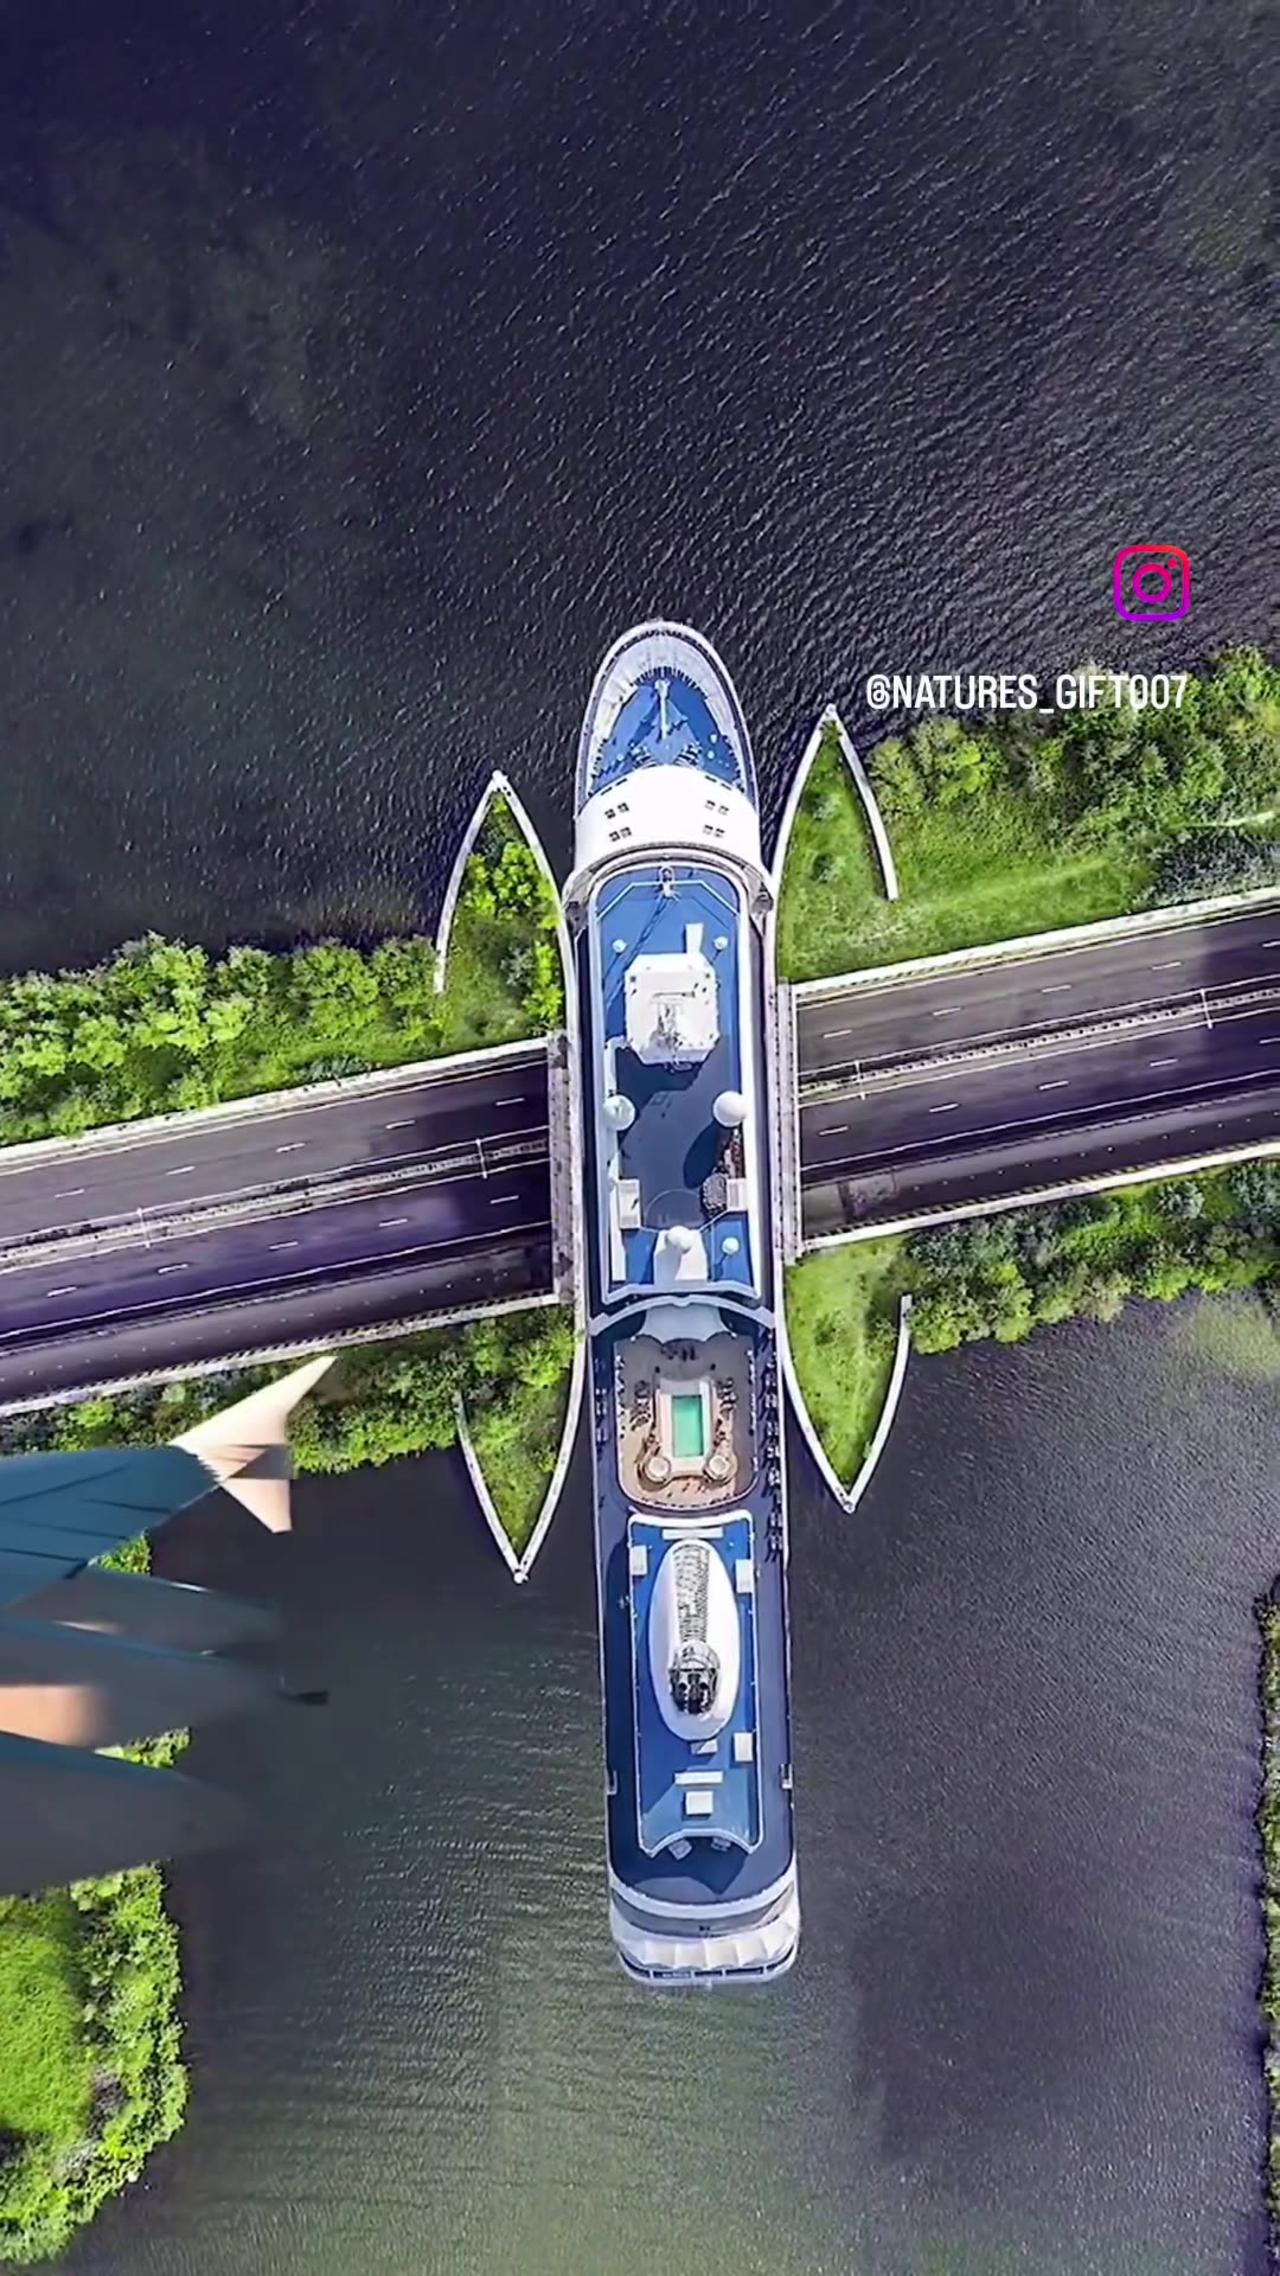 Very amazing cruise ship 🚢 how to open bridge see this